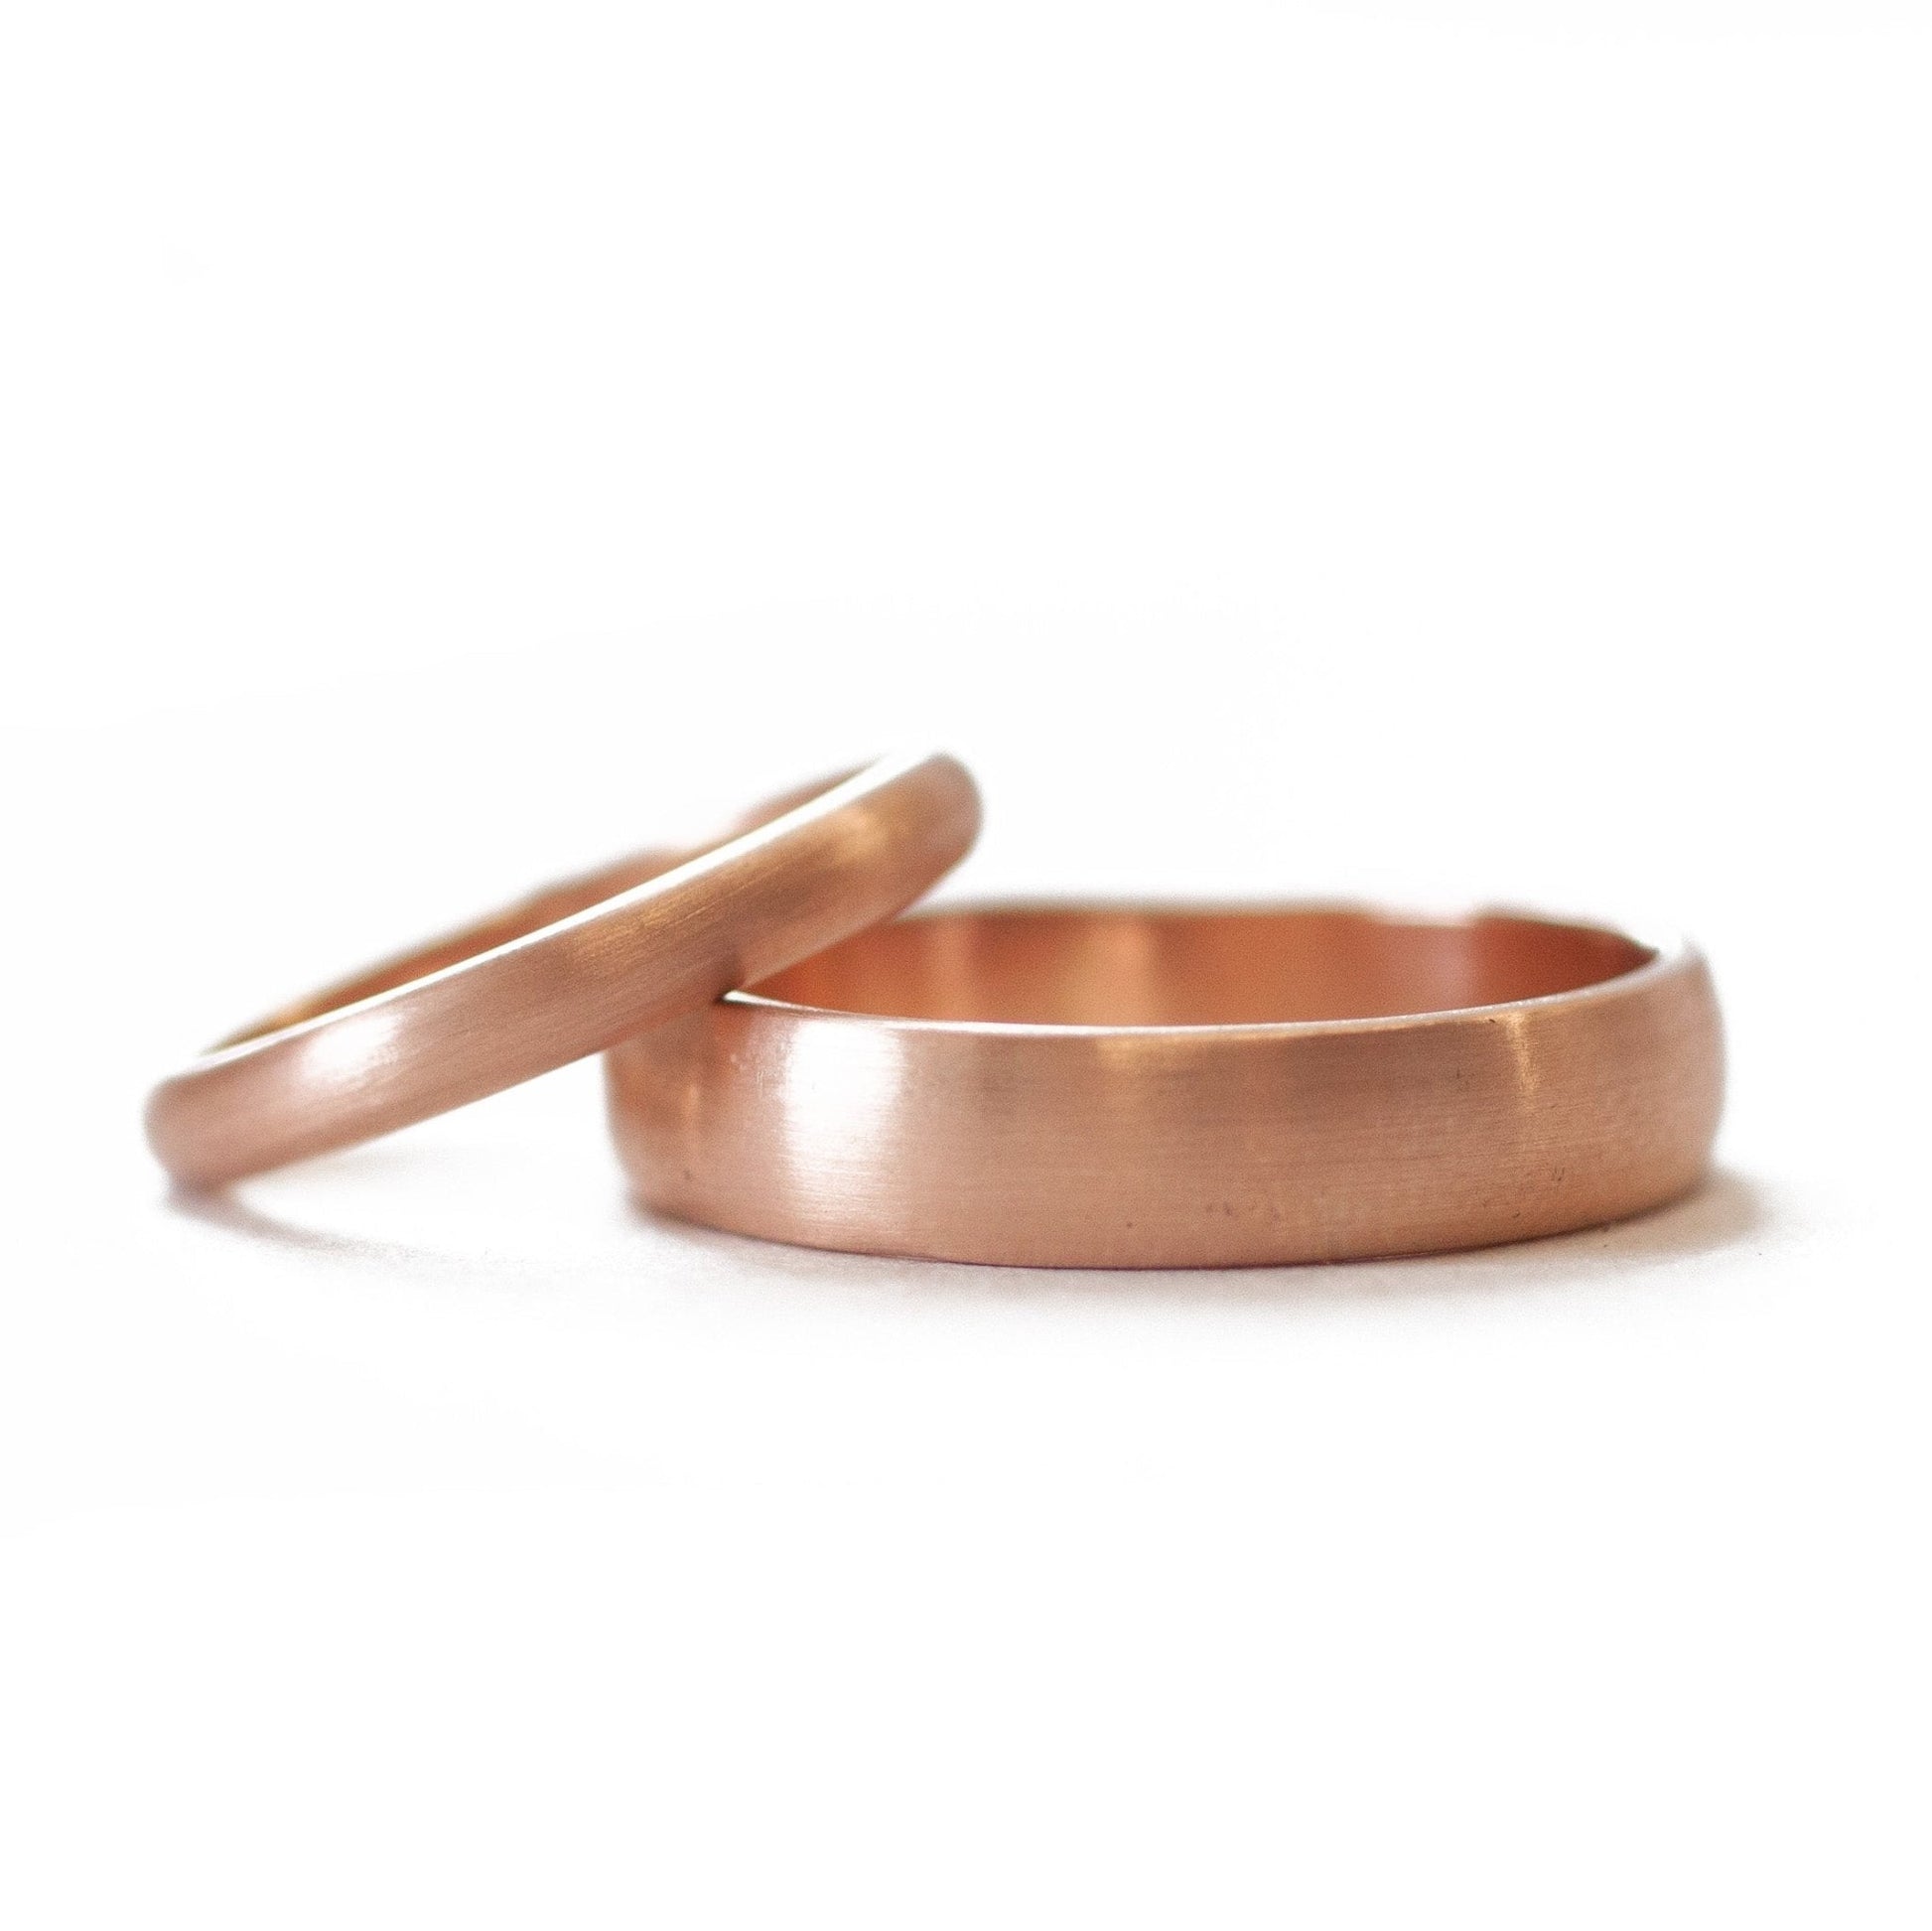 The Rose Gold Classic Band - W.R. Metalarts